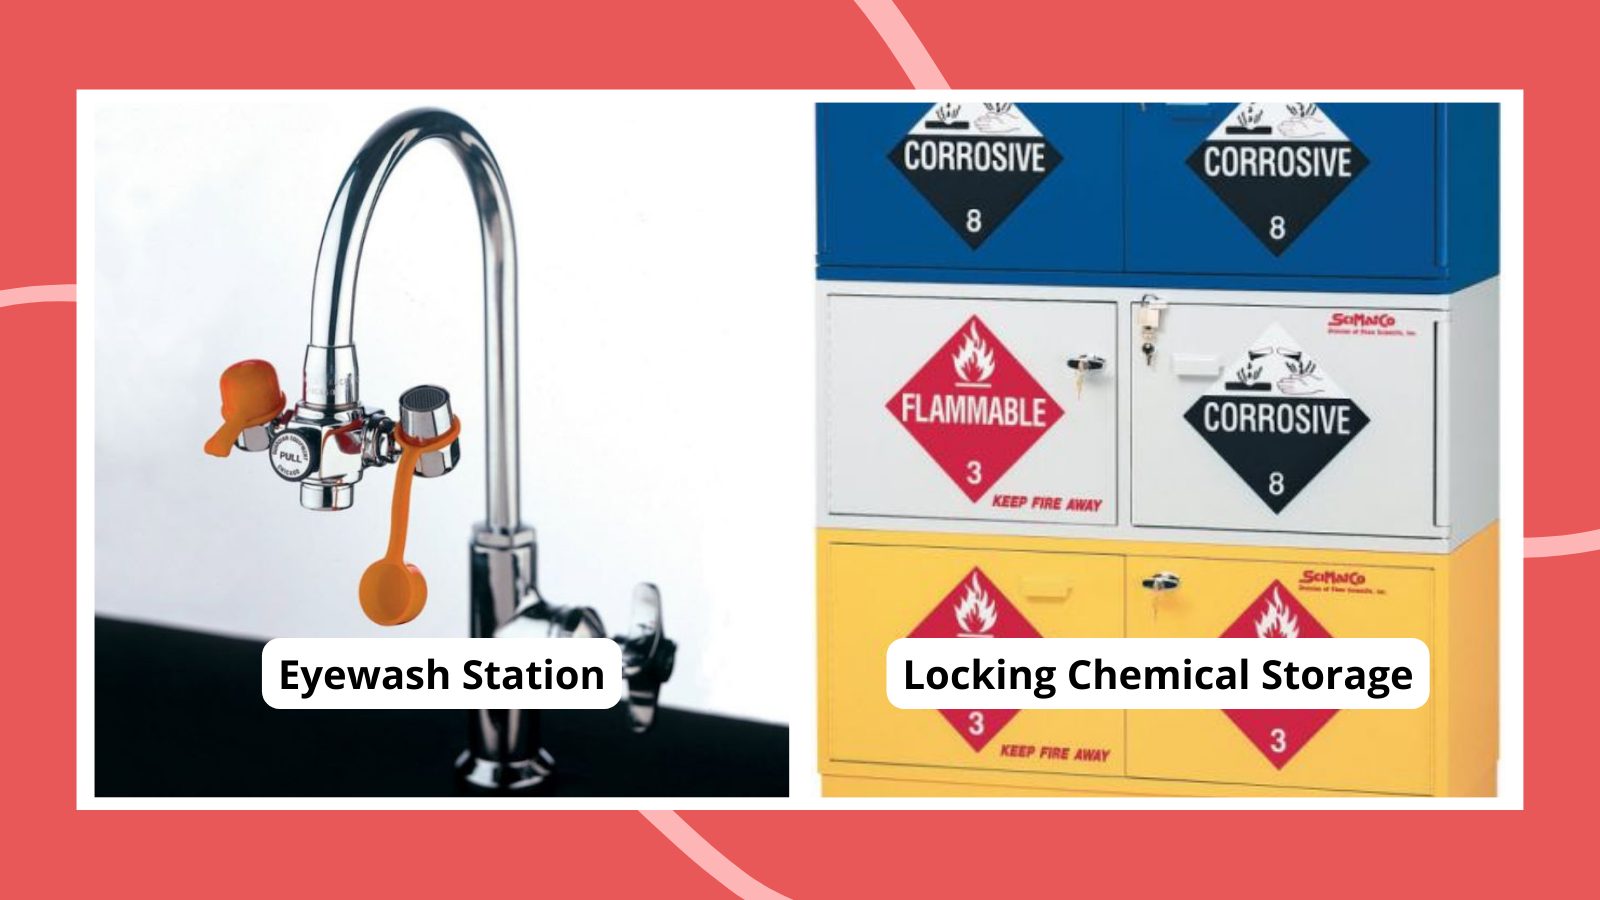 Collage of science lab safety equipment, including an eyewash station and locking chemical storage cabinets